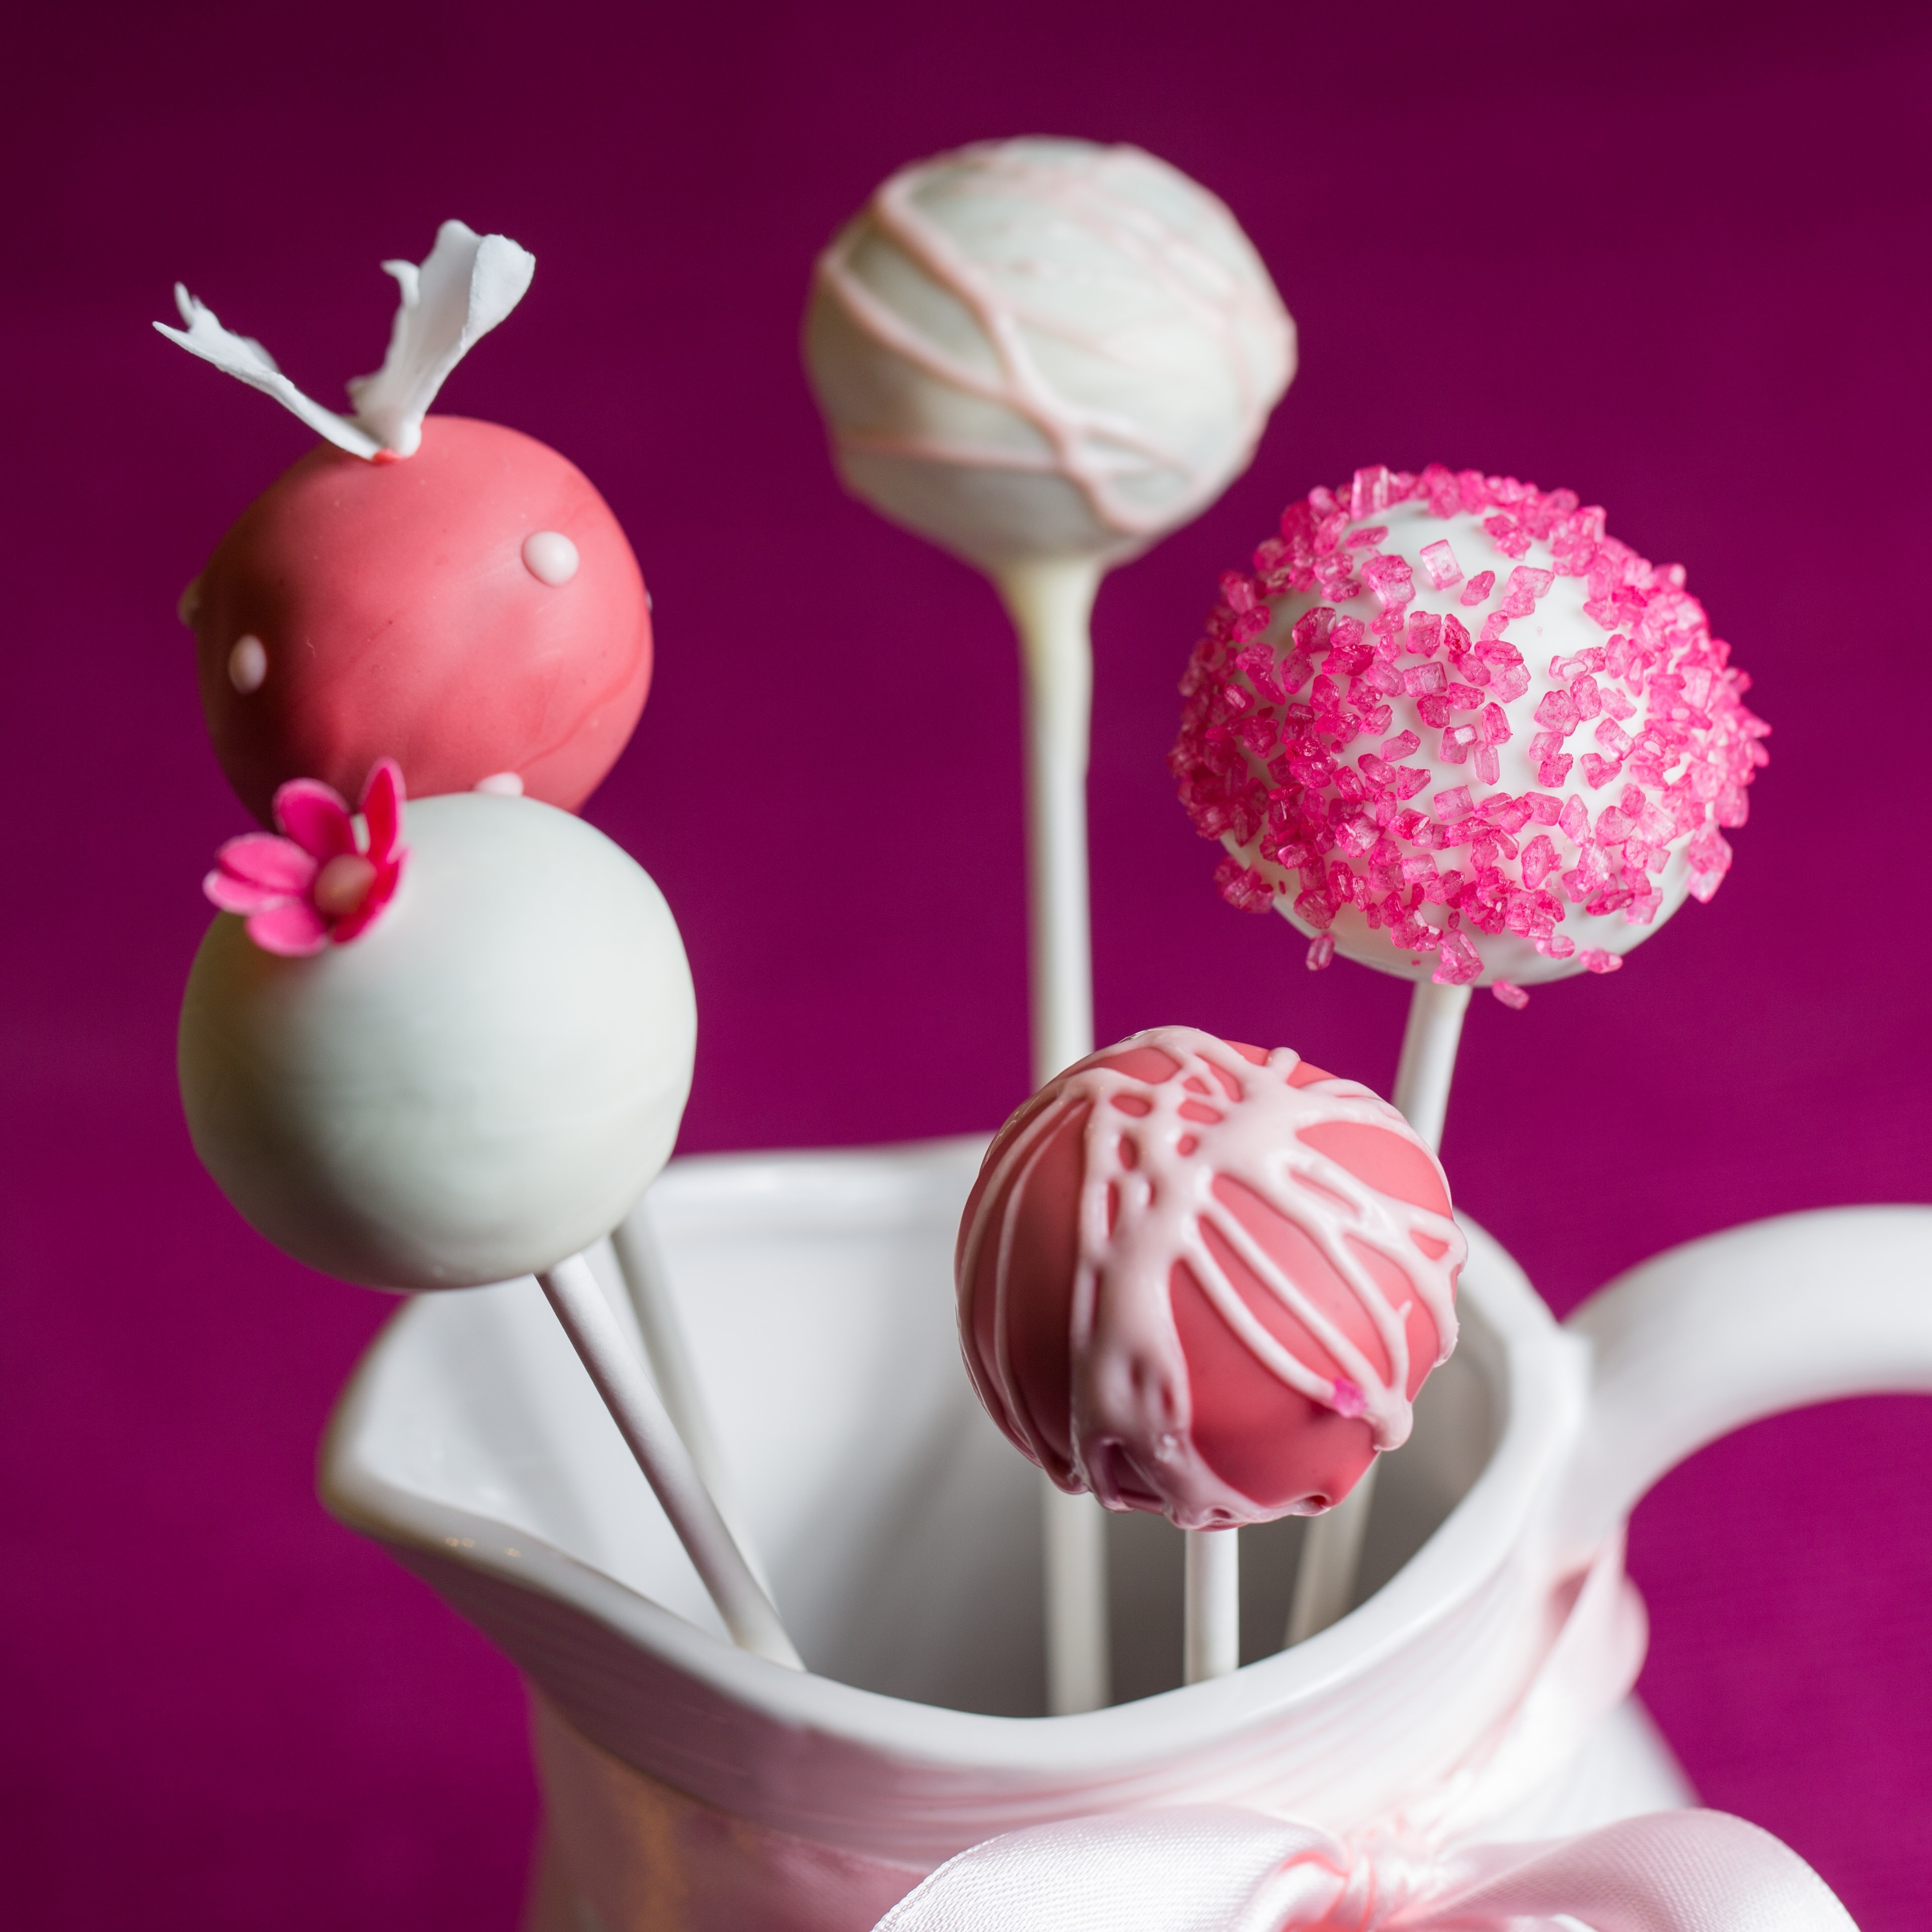 Pink And White Lollipops With Vase Image